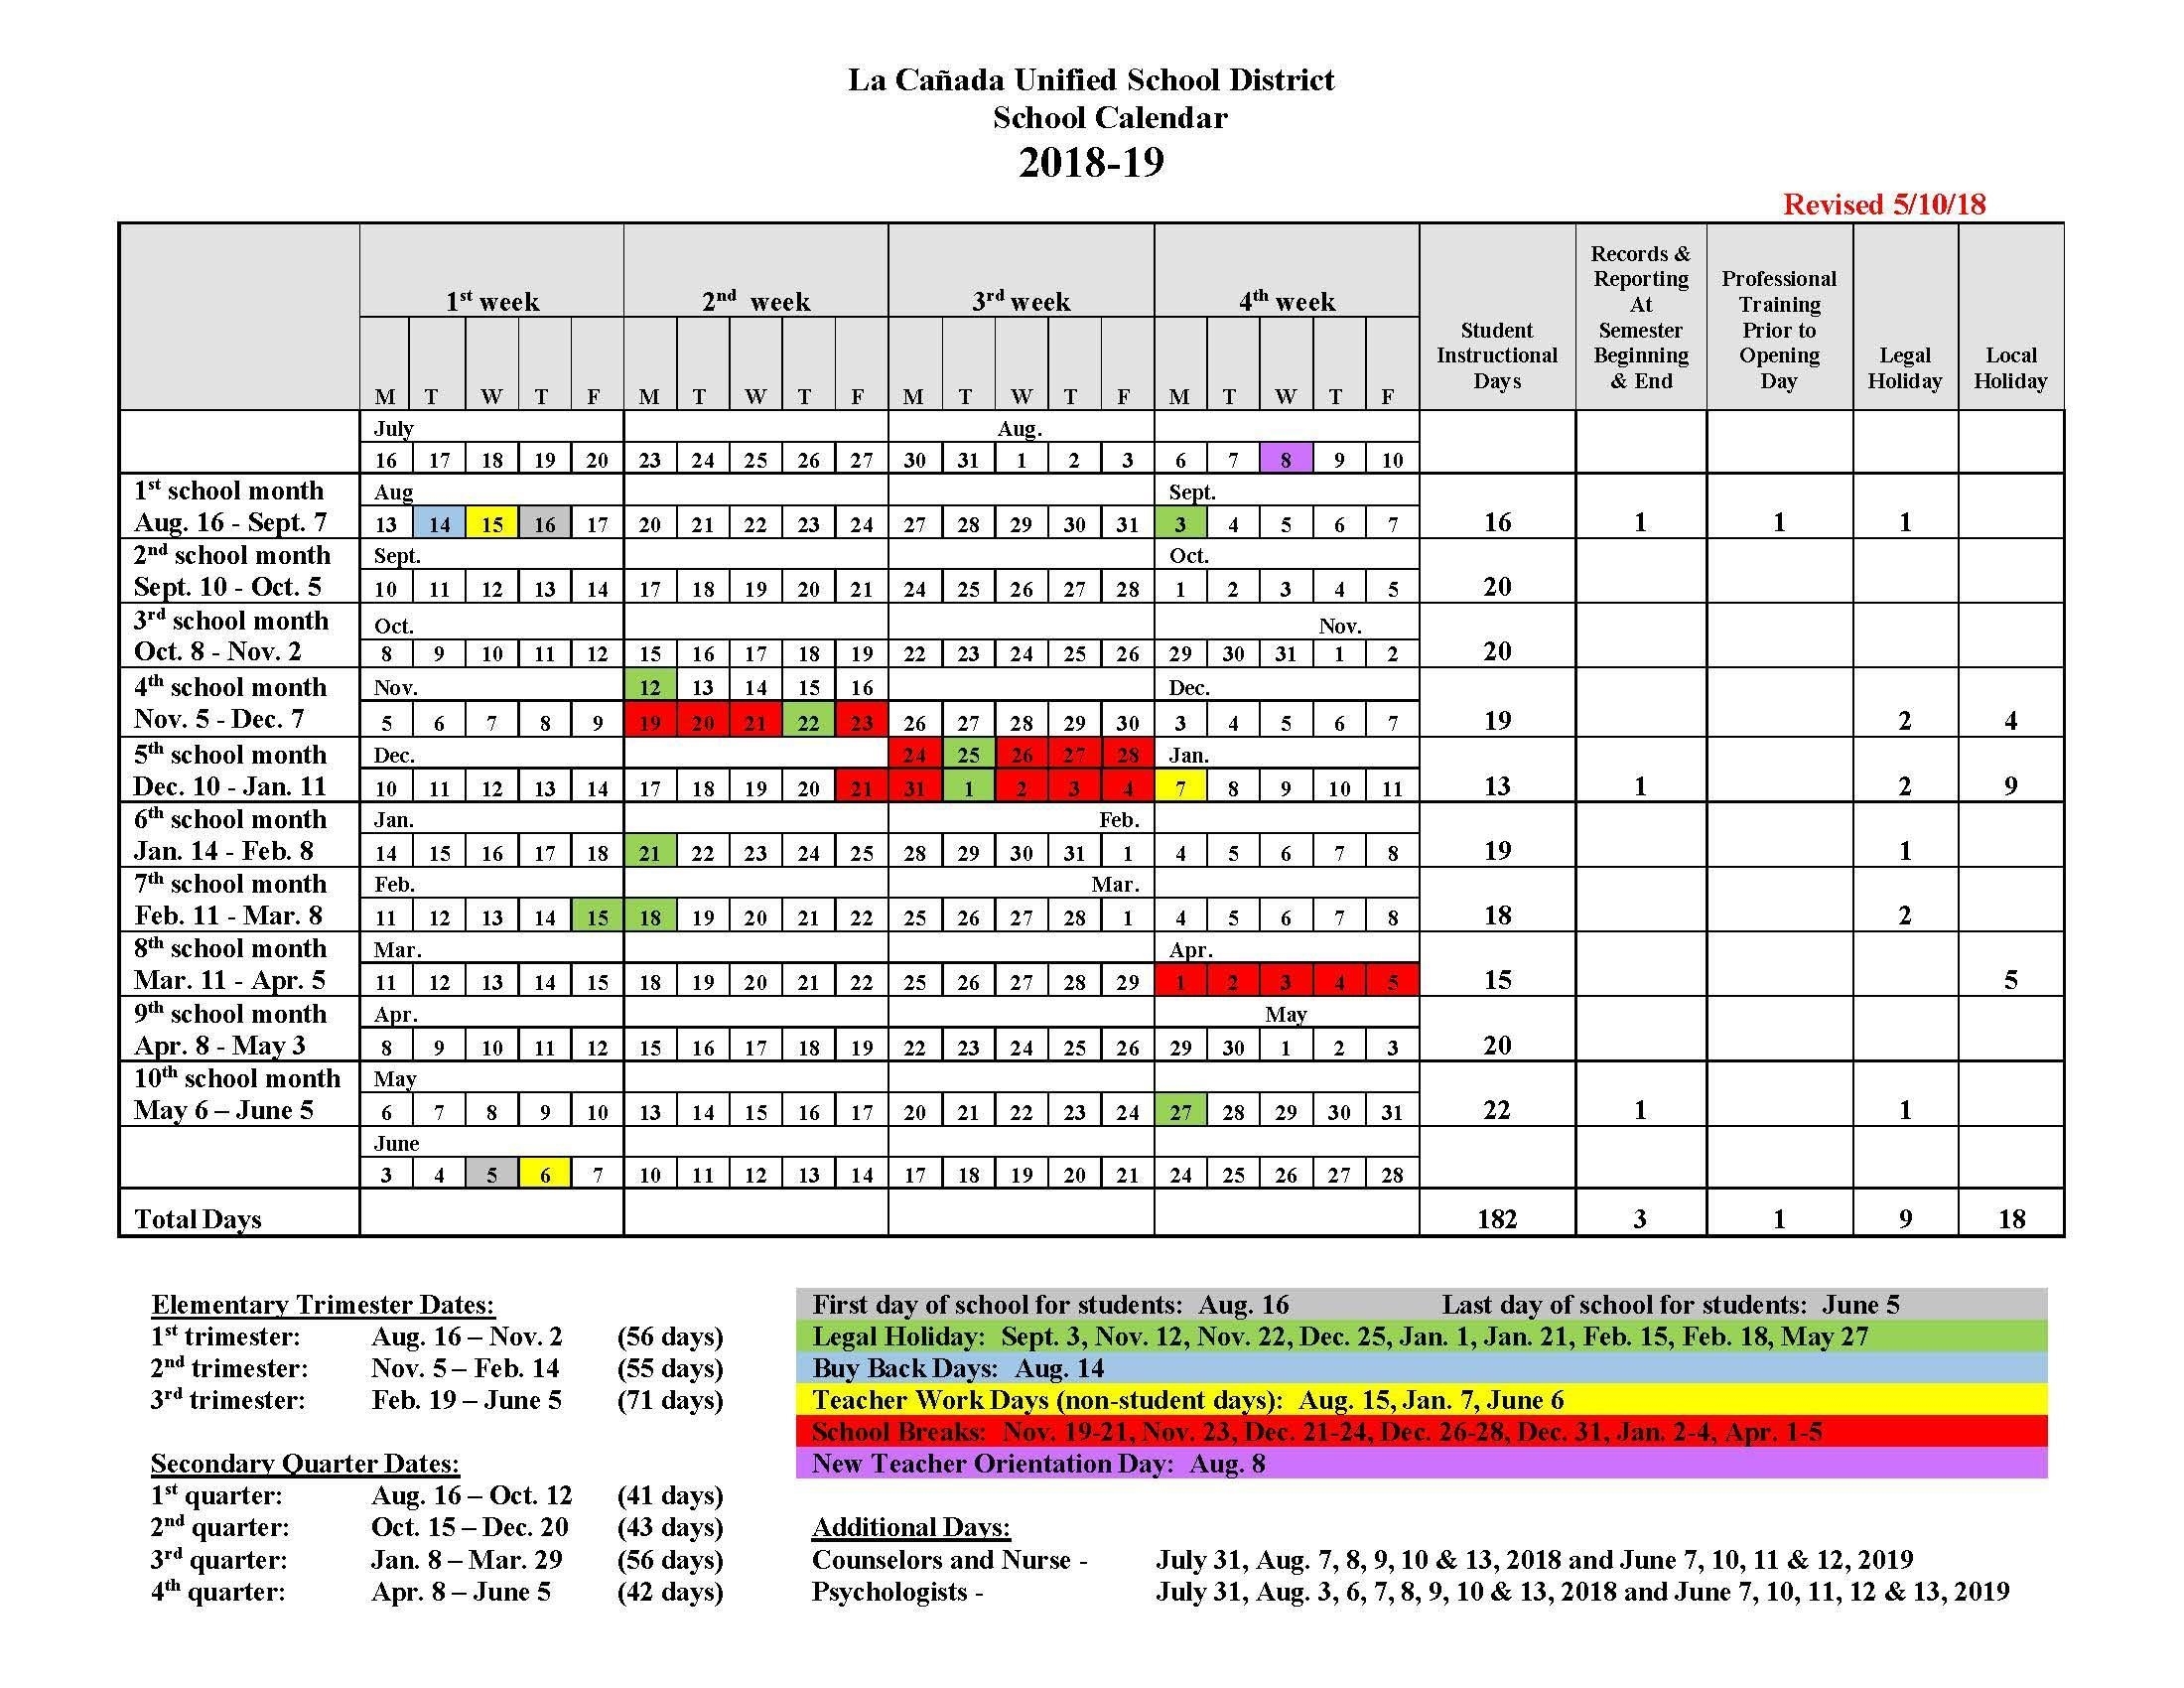 Instructional Days Calendars – Yearly Calendars – La Cañada Unified Exceptional Calendar School District 96